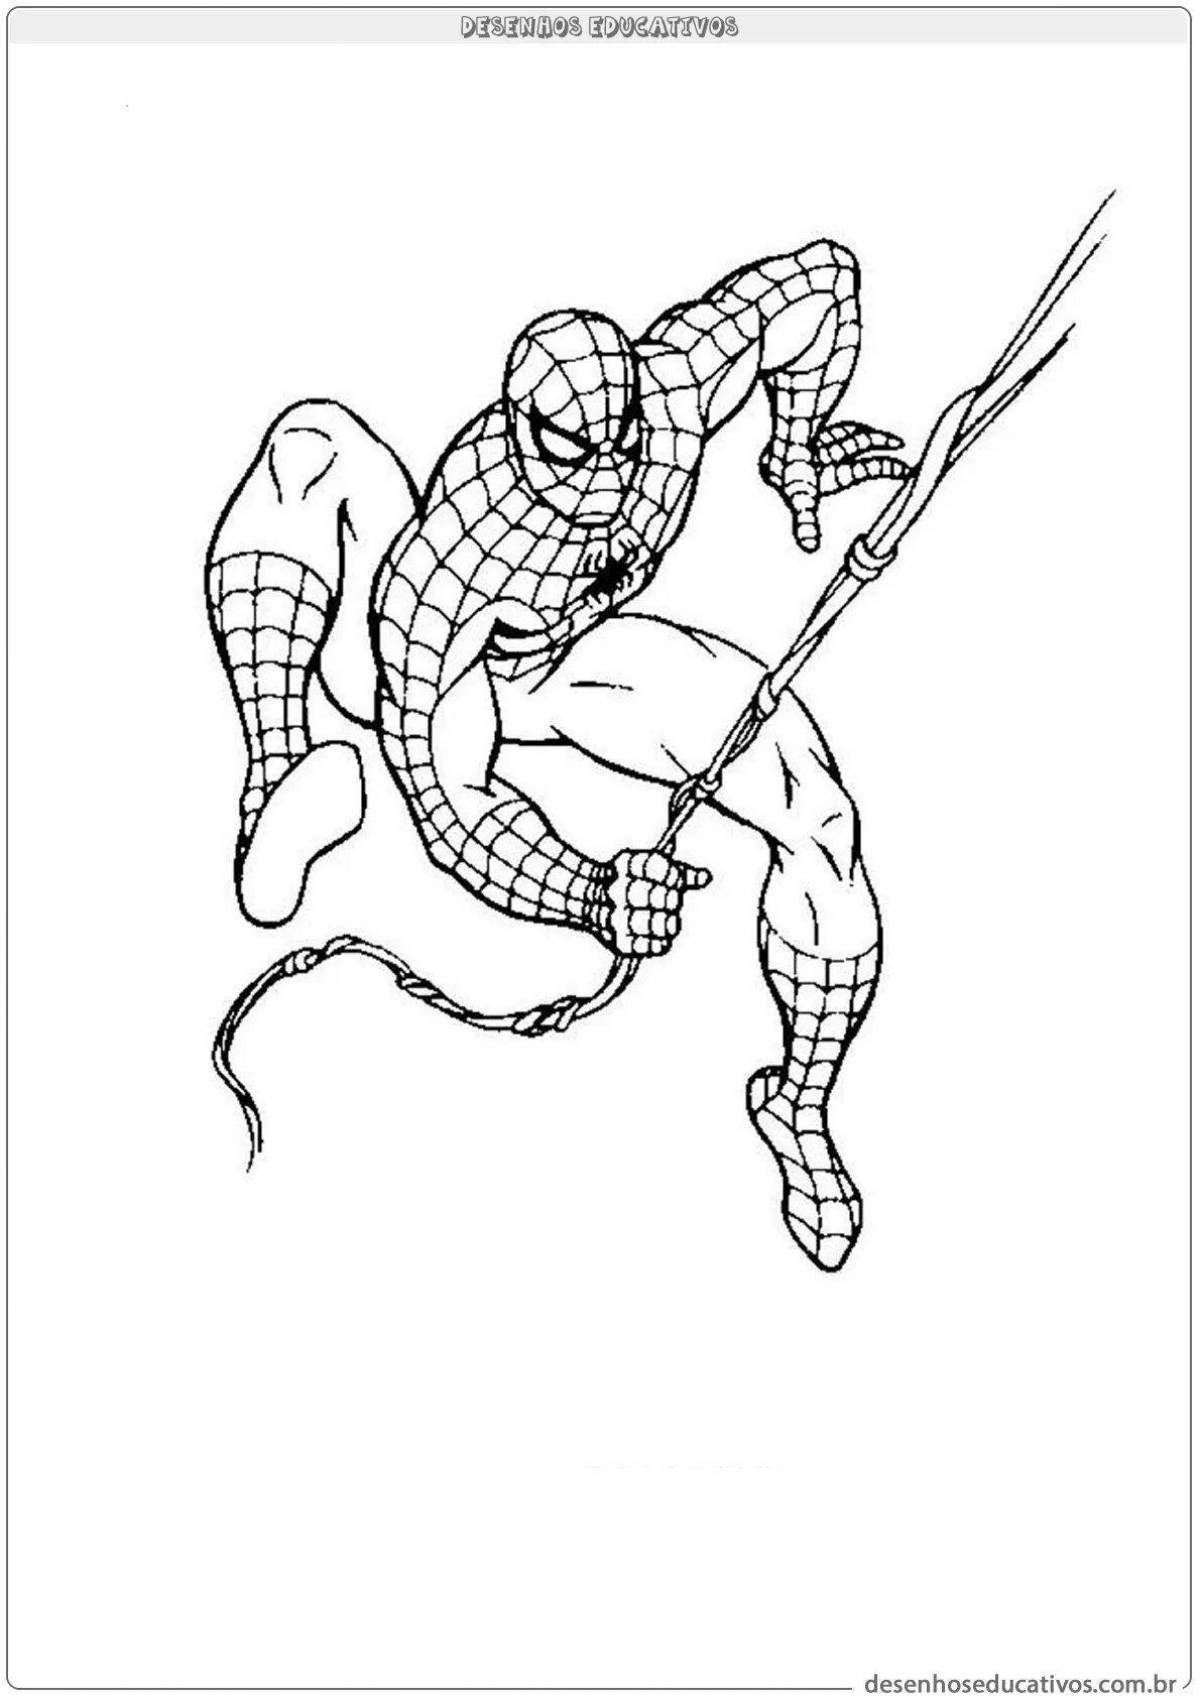 Spider-man brightly colored coloring book colored